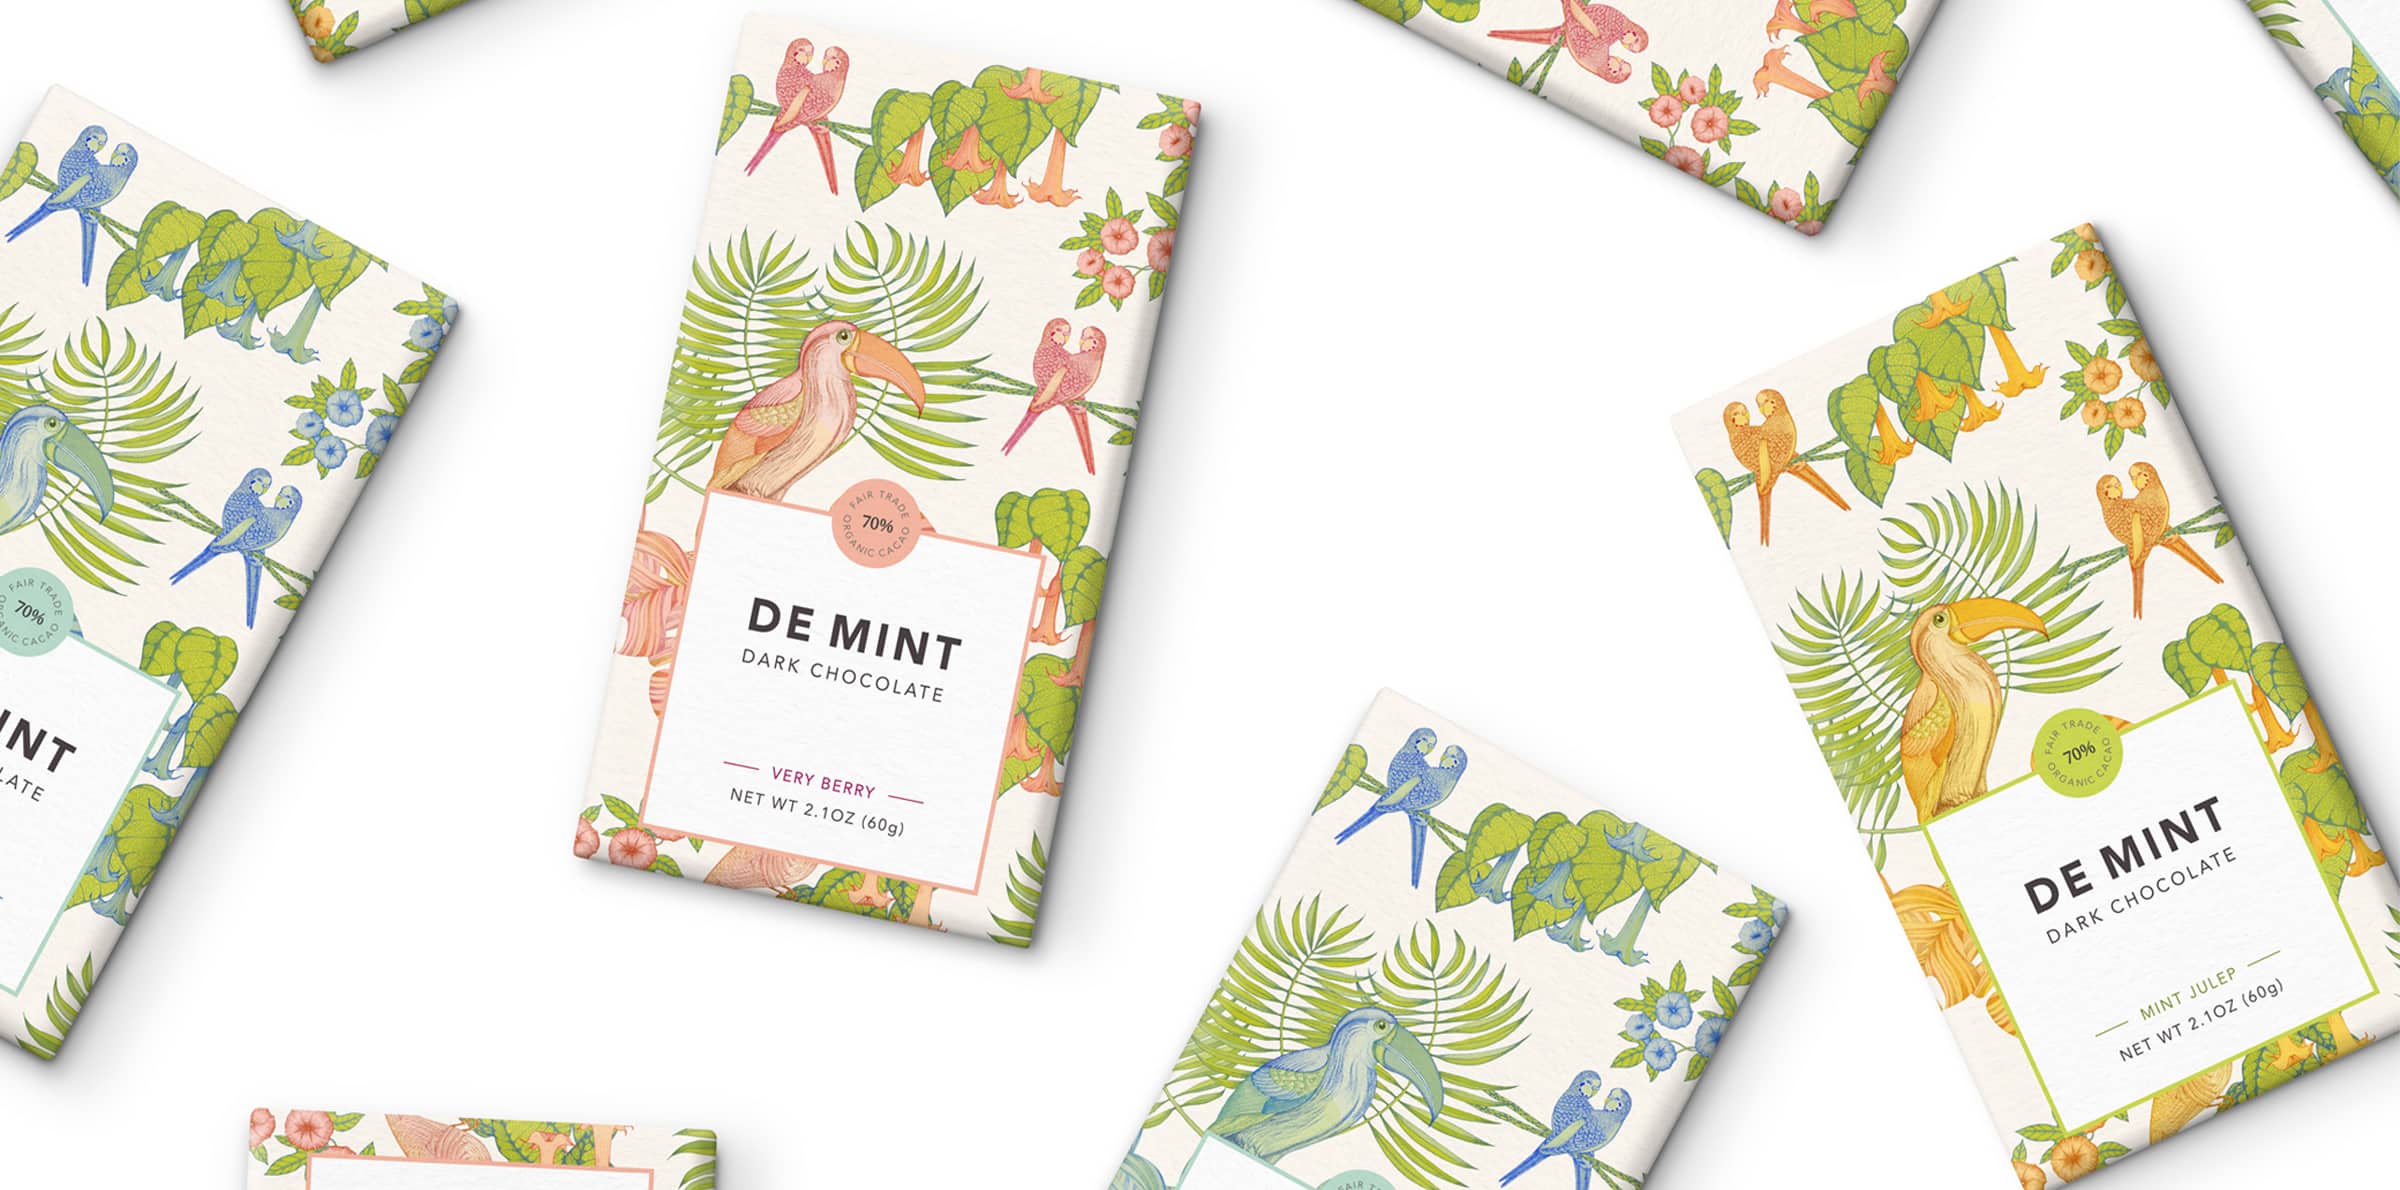 The chocolate bar packaging designs feature a colorful palette of muted colours.